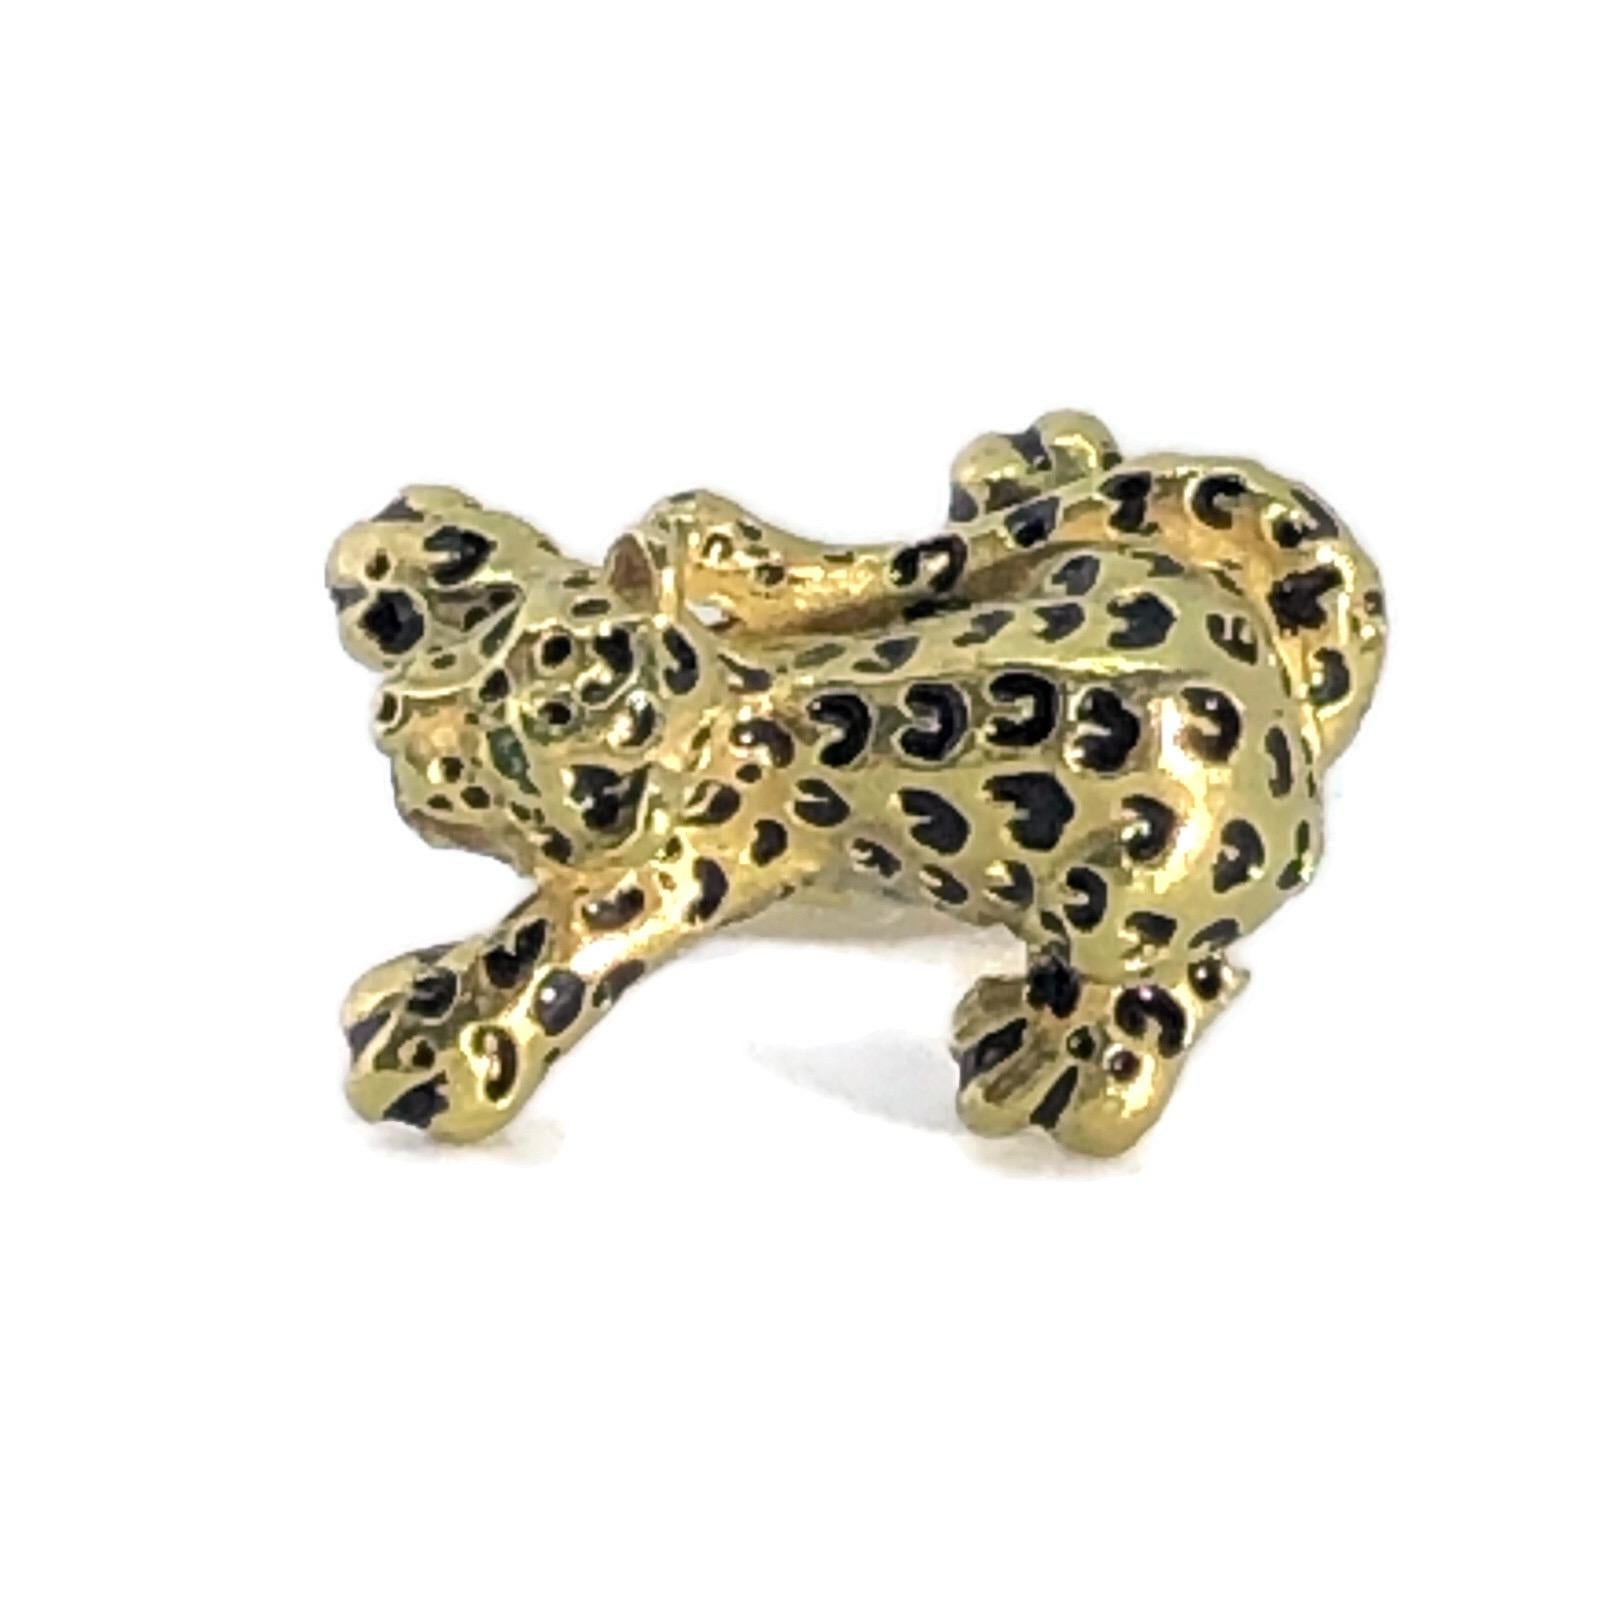 Vintage Unisex Cufflinks of Tigers Made In Italy  In 18k Gold With Emerald Eyes For Sale 1